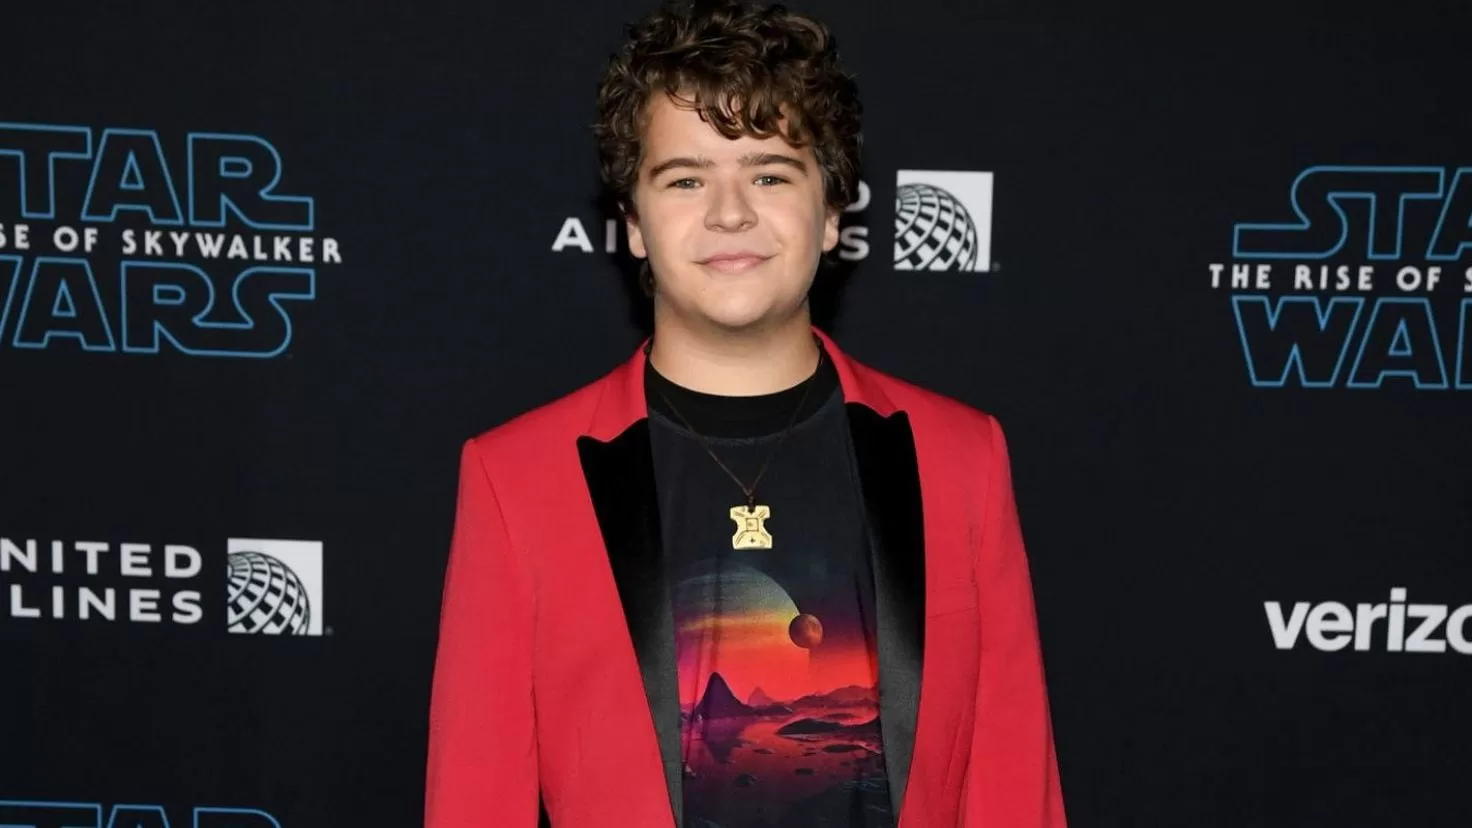 Gaten Matarazzo makes a mistake about Stranger Things: We should kill bad people
